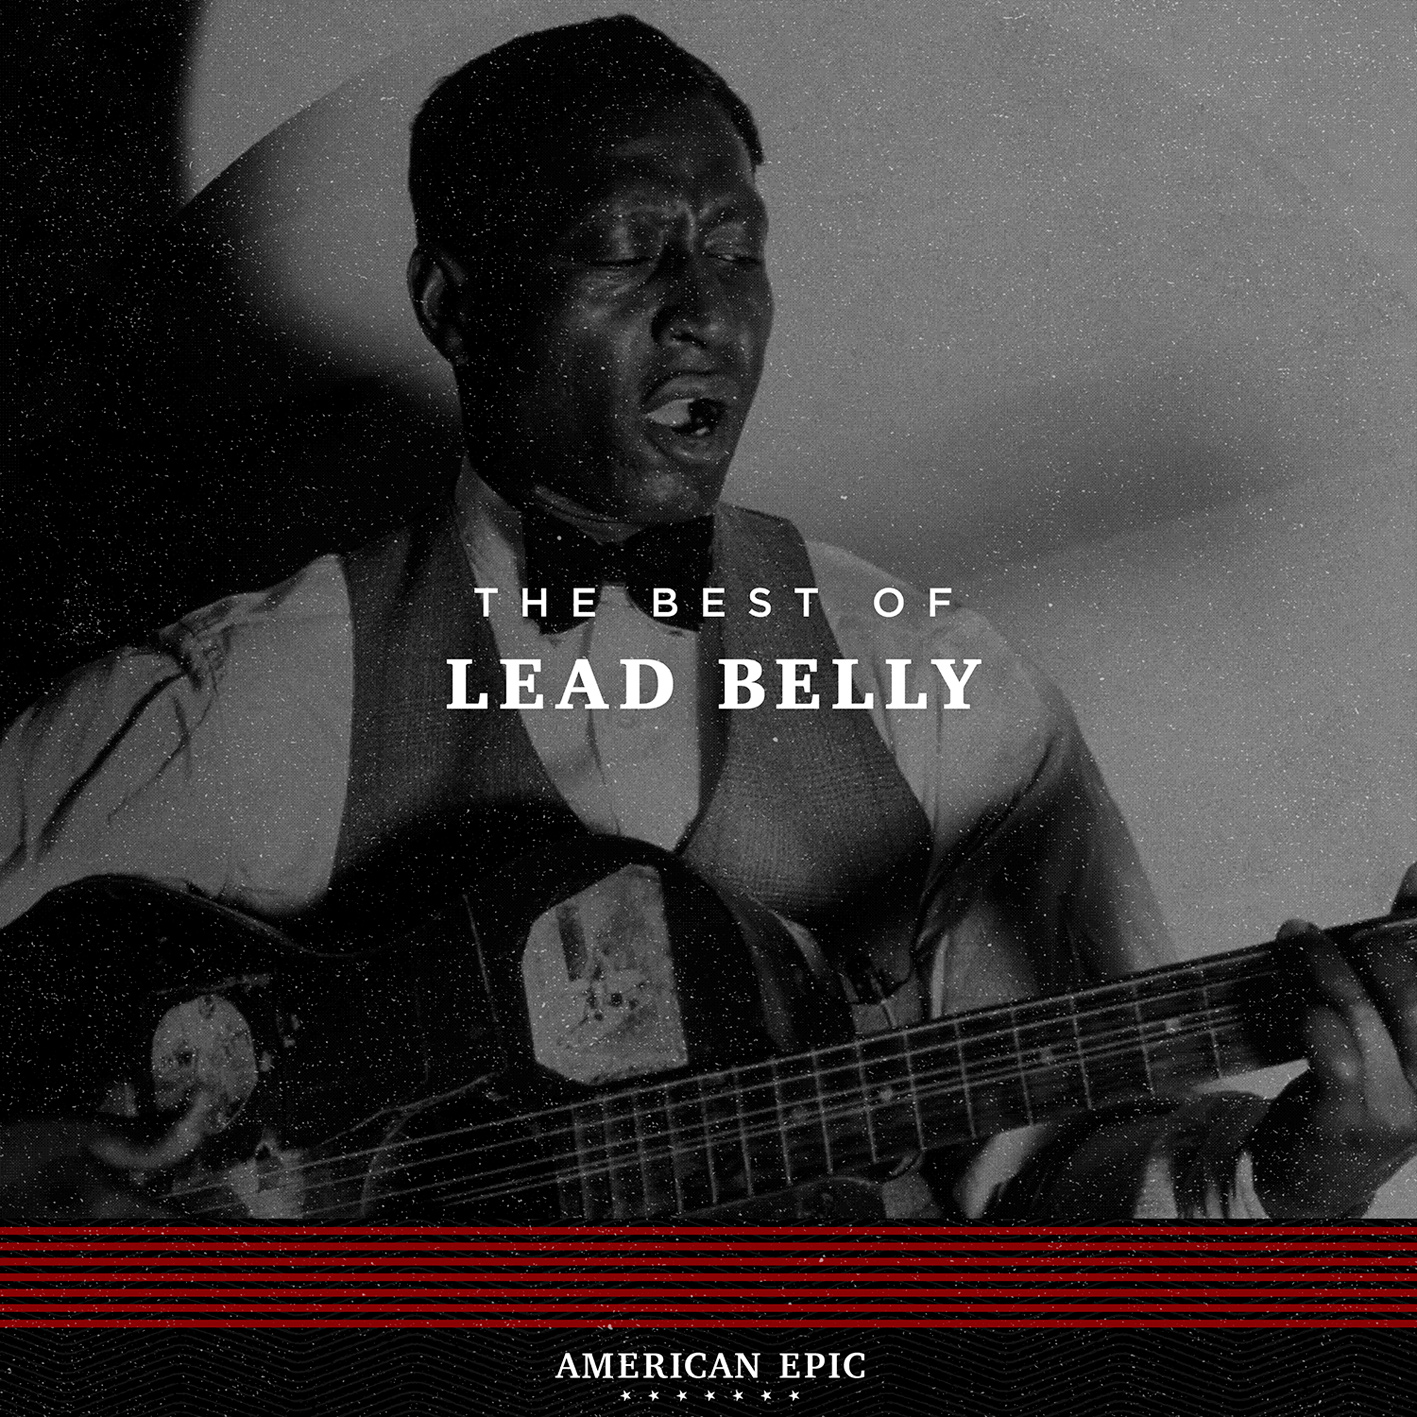 Lead Belly - American Epic: The Best Of Lead Belly (2017) [HDTracks FLAC 24bit/96kHz]